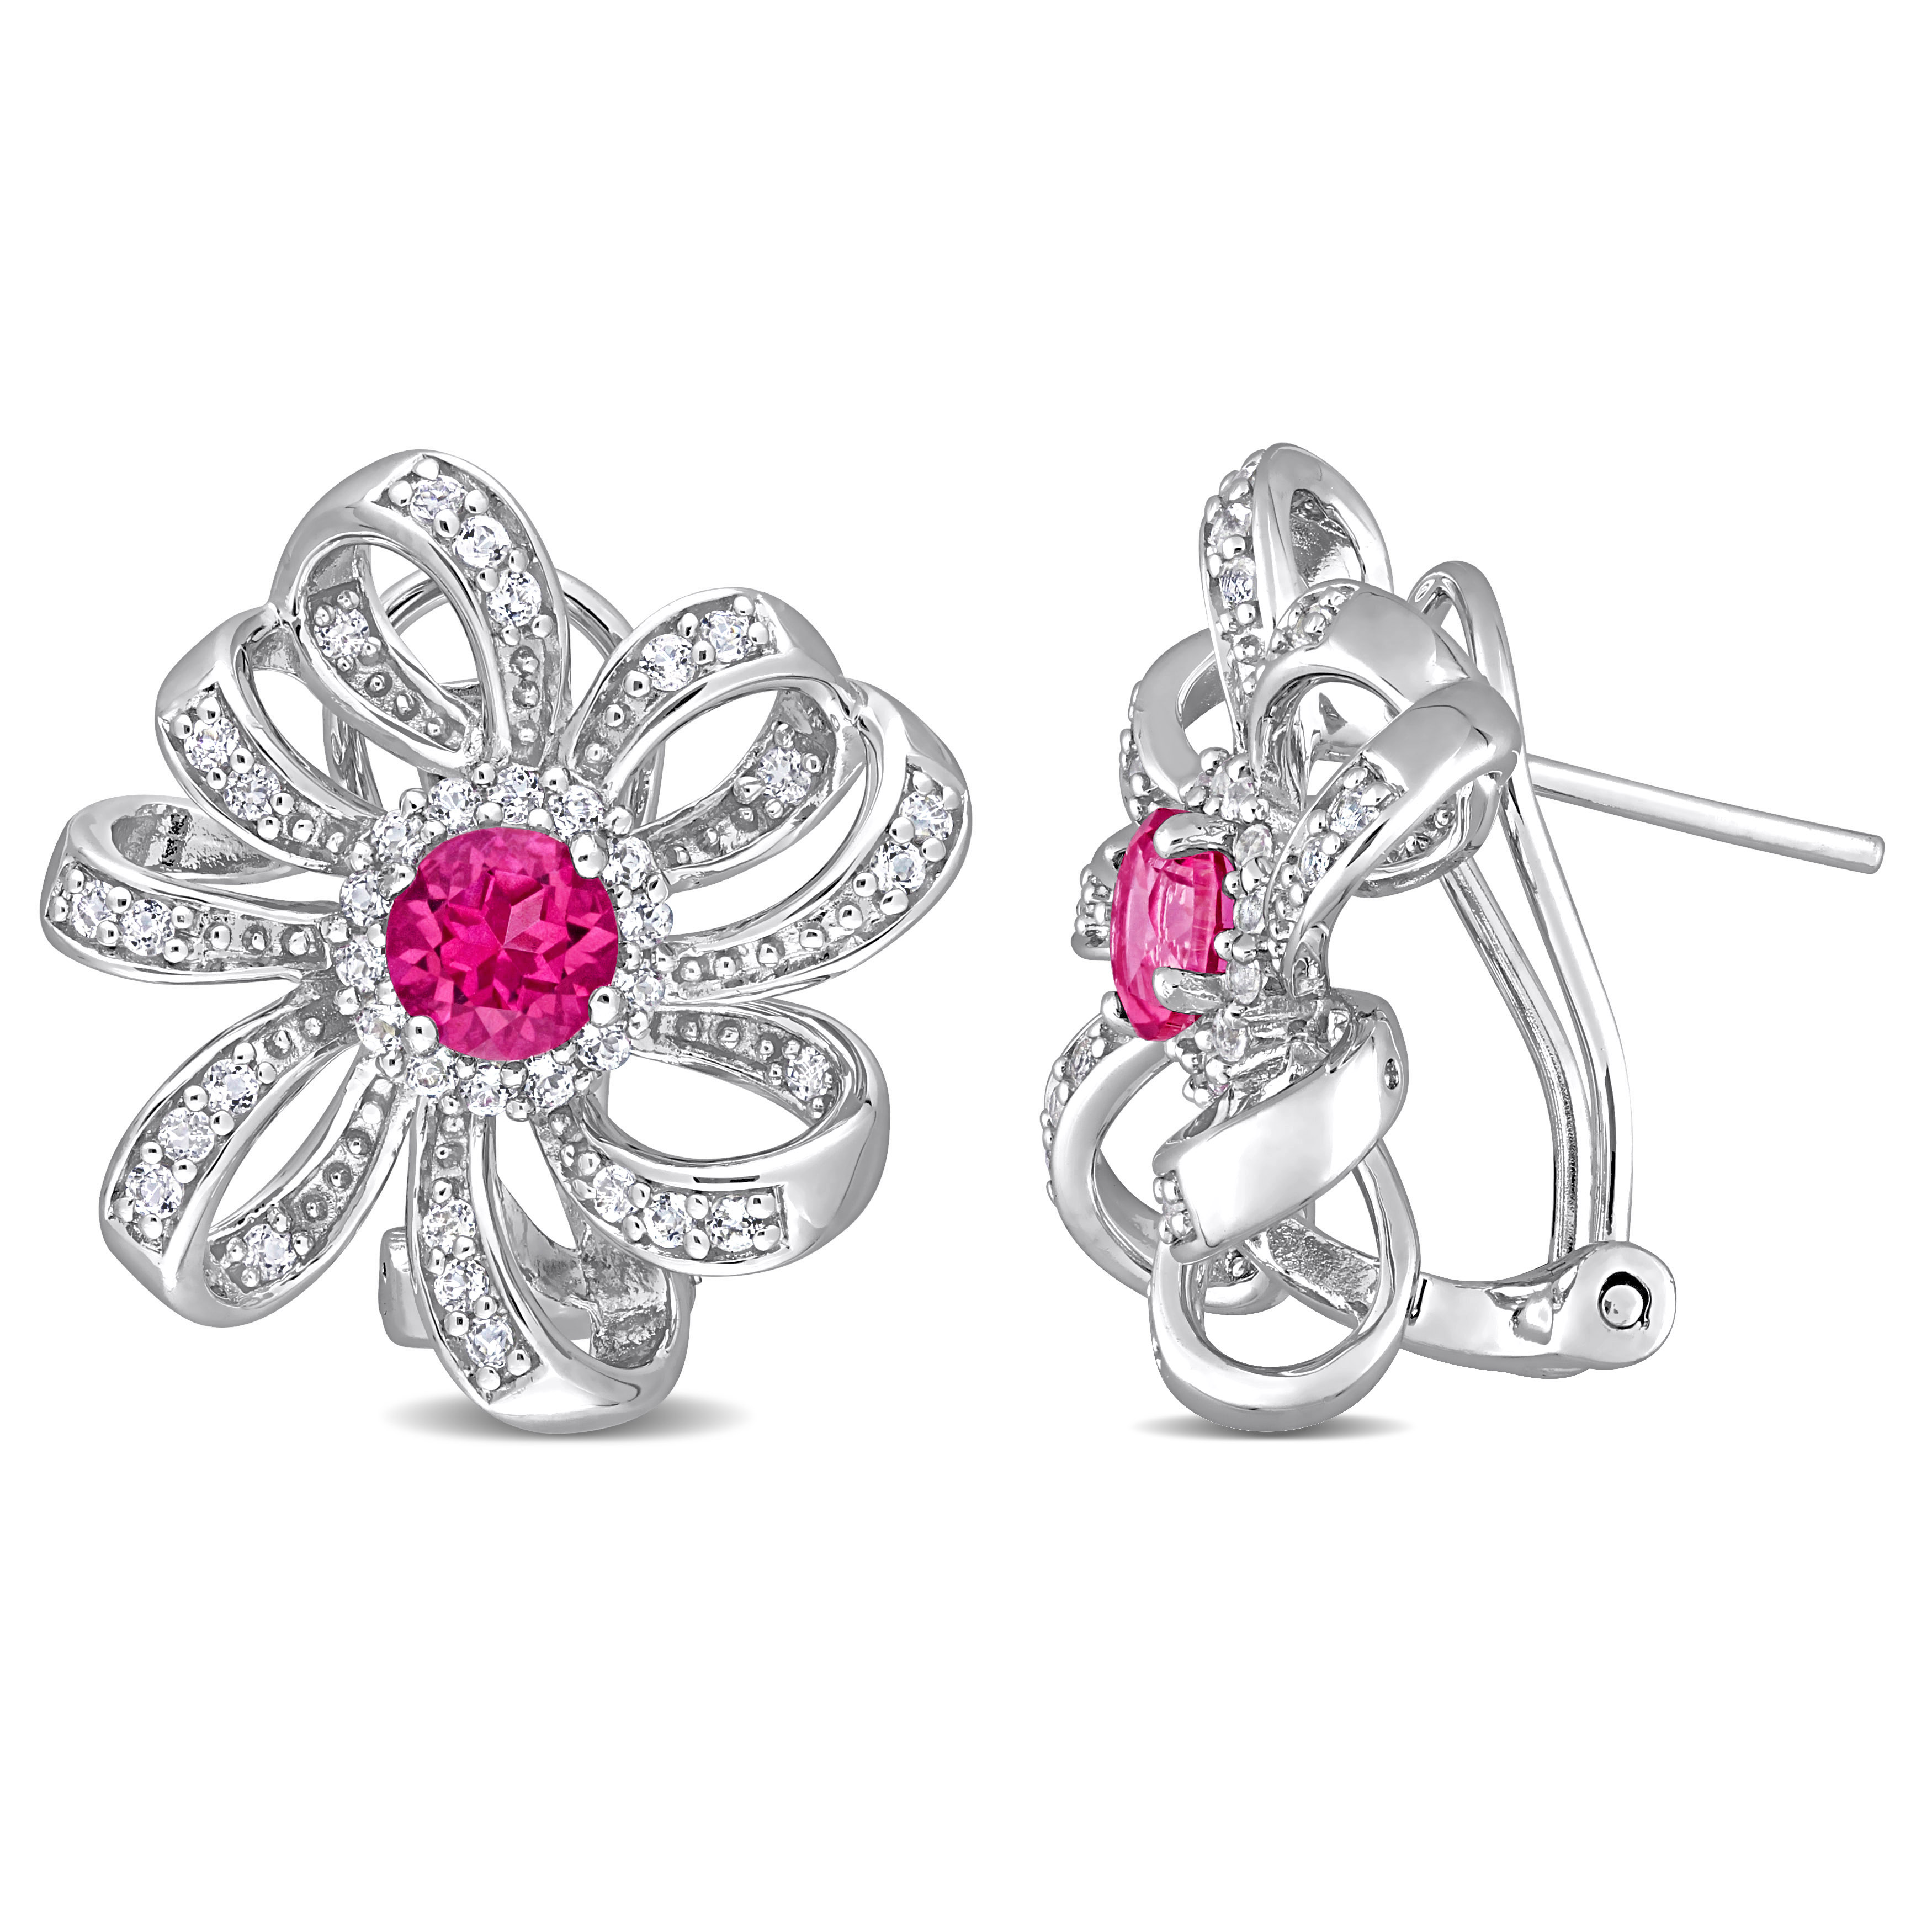 2 CT TGW Pink Topaz and White Topaz Flower Omega Clip Earrings in Sterling Silver